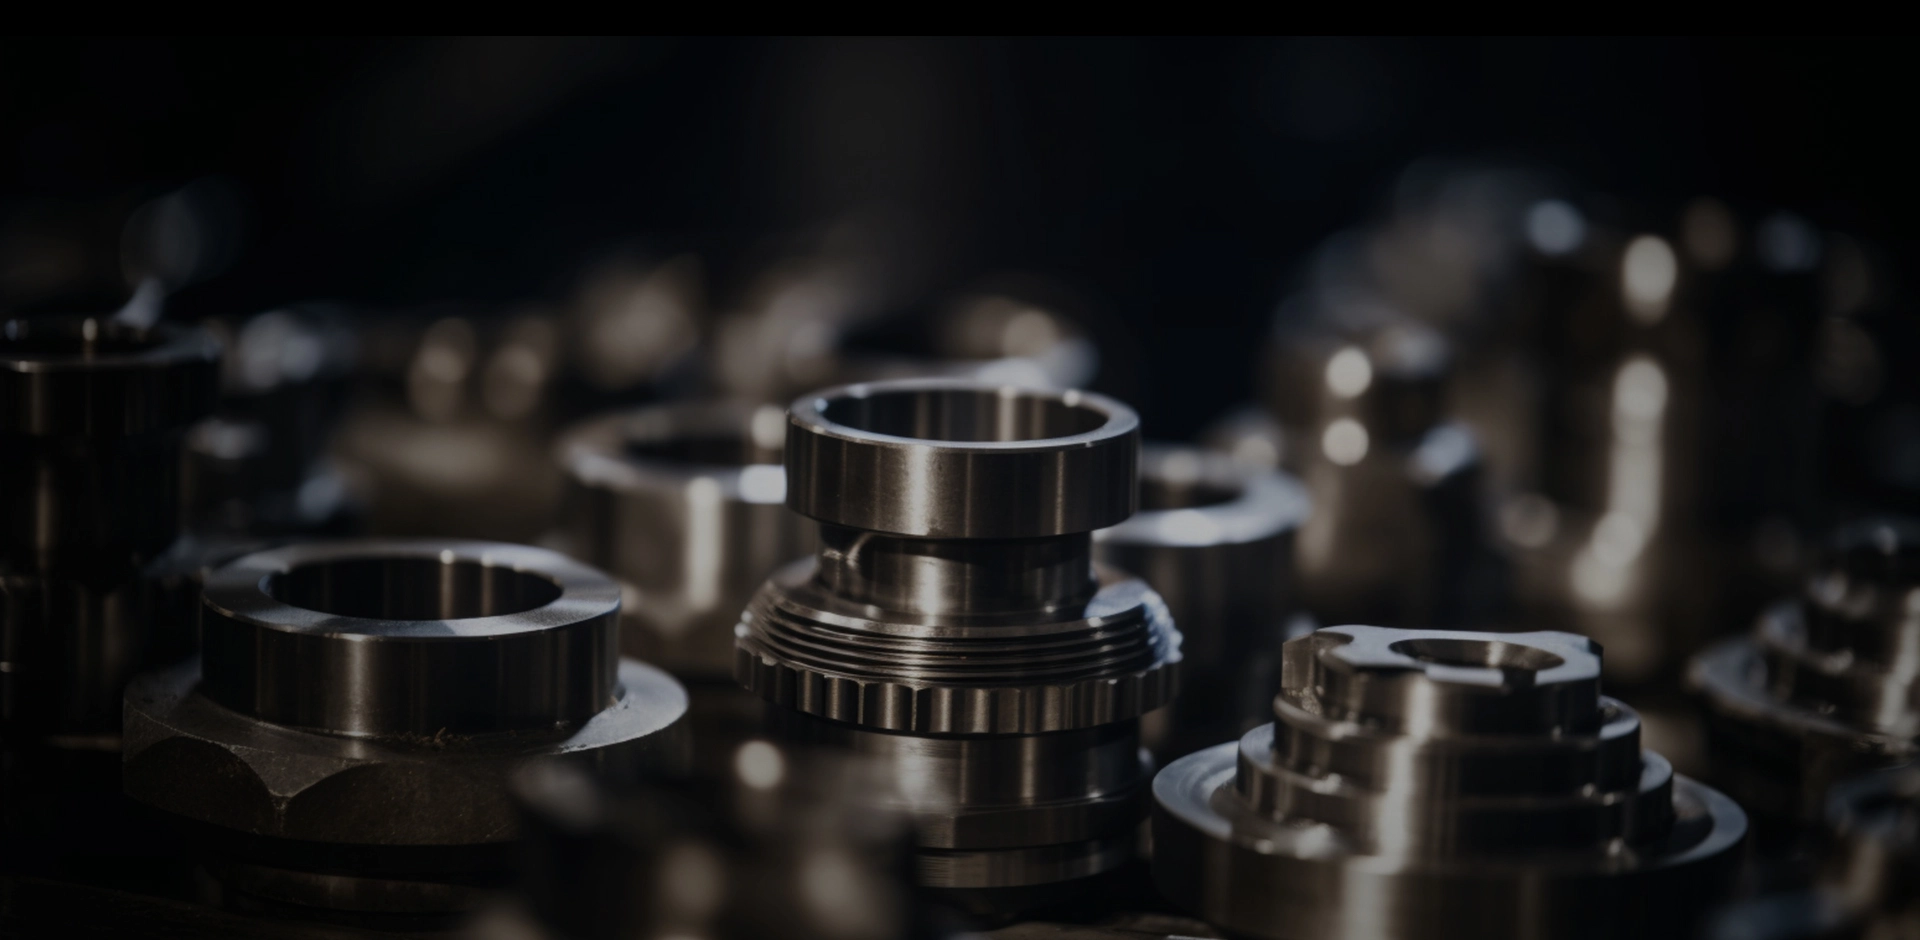 Fine Precision is a Top-notch Custom Parts Manufacturer and offers CNC Machining, Precision Casting, Injection Molding, and Prototyping Services.